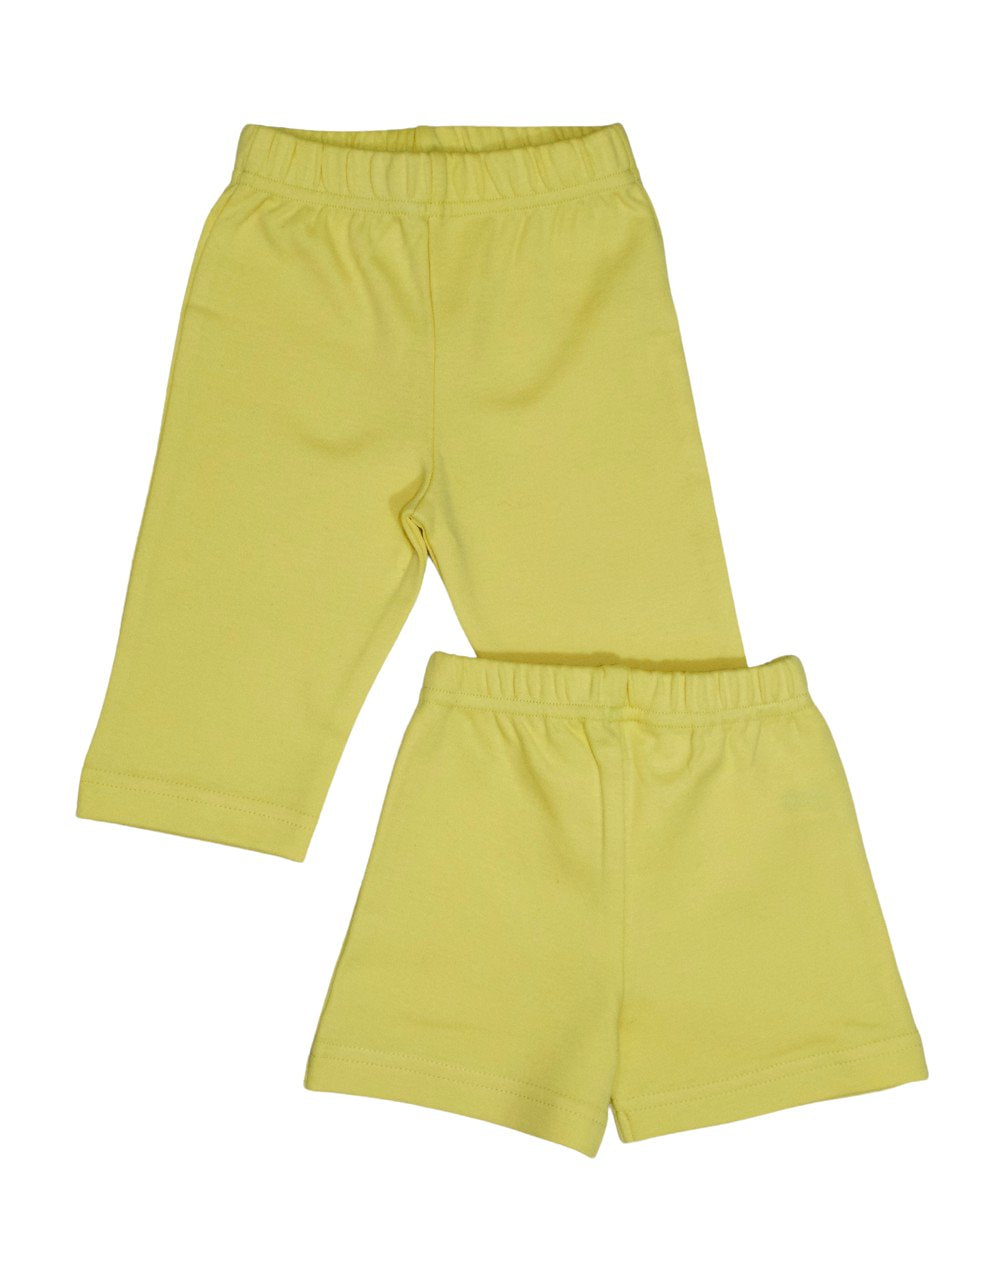 Pull on Pants & Shorts- Available in 4 Colors Baby Passion Lilie 